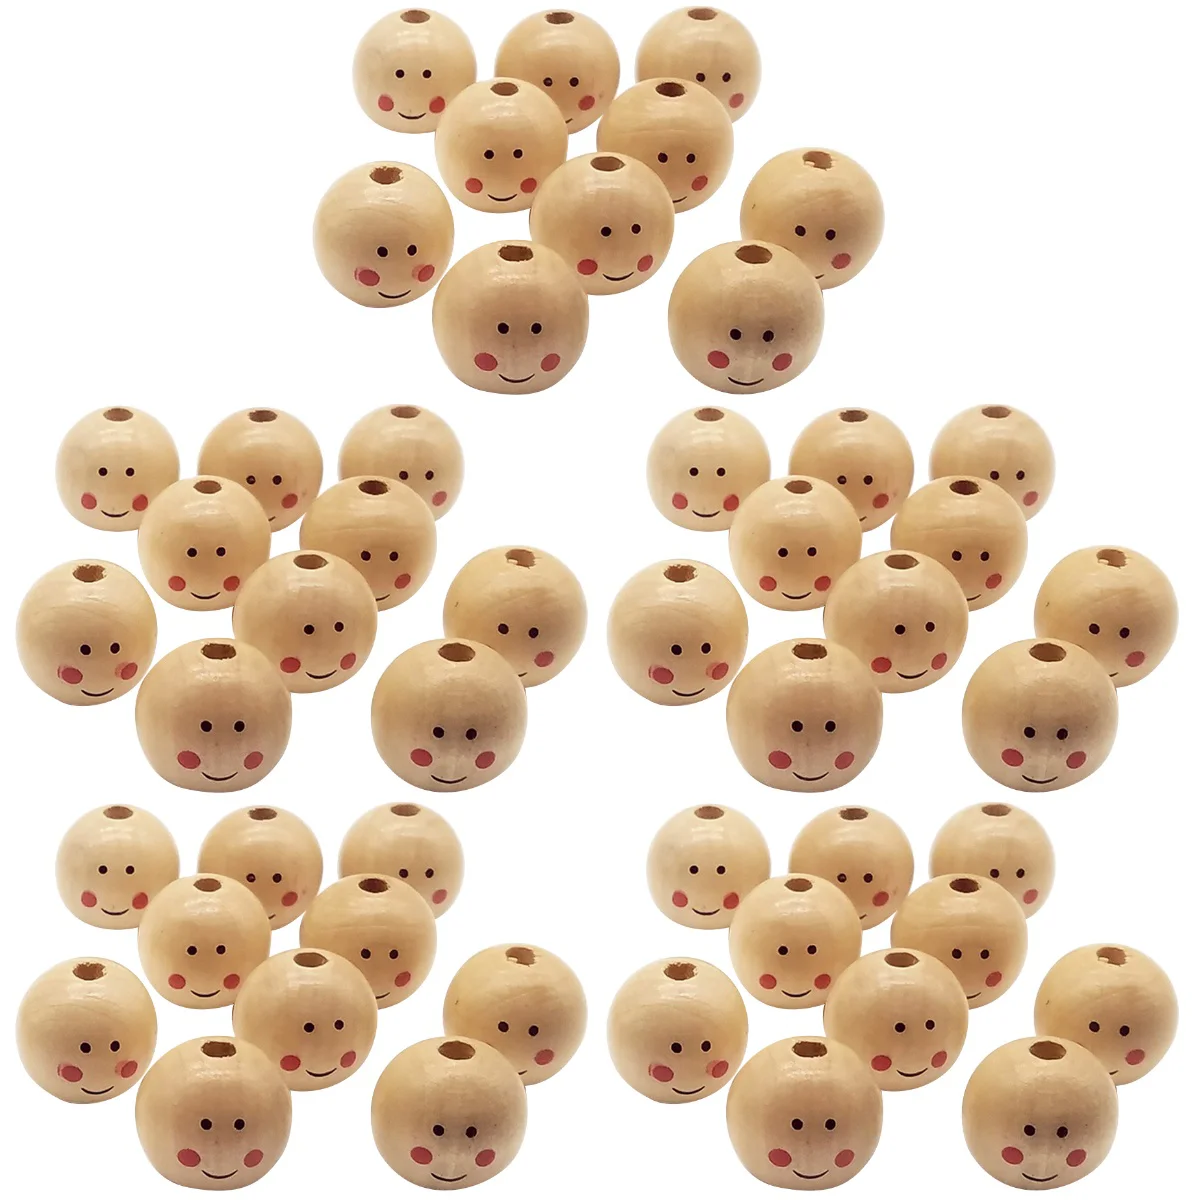 5x Smile Face Beads Head Spacer Beads Crafts Wooden Beads Bracelet Wood Bead Crafts Wooden Beads Bracelet Bead Charms